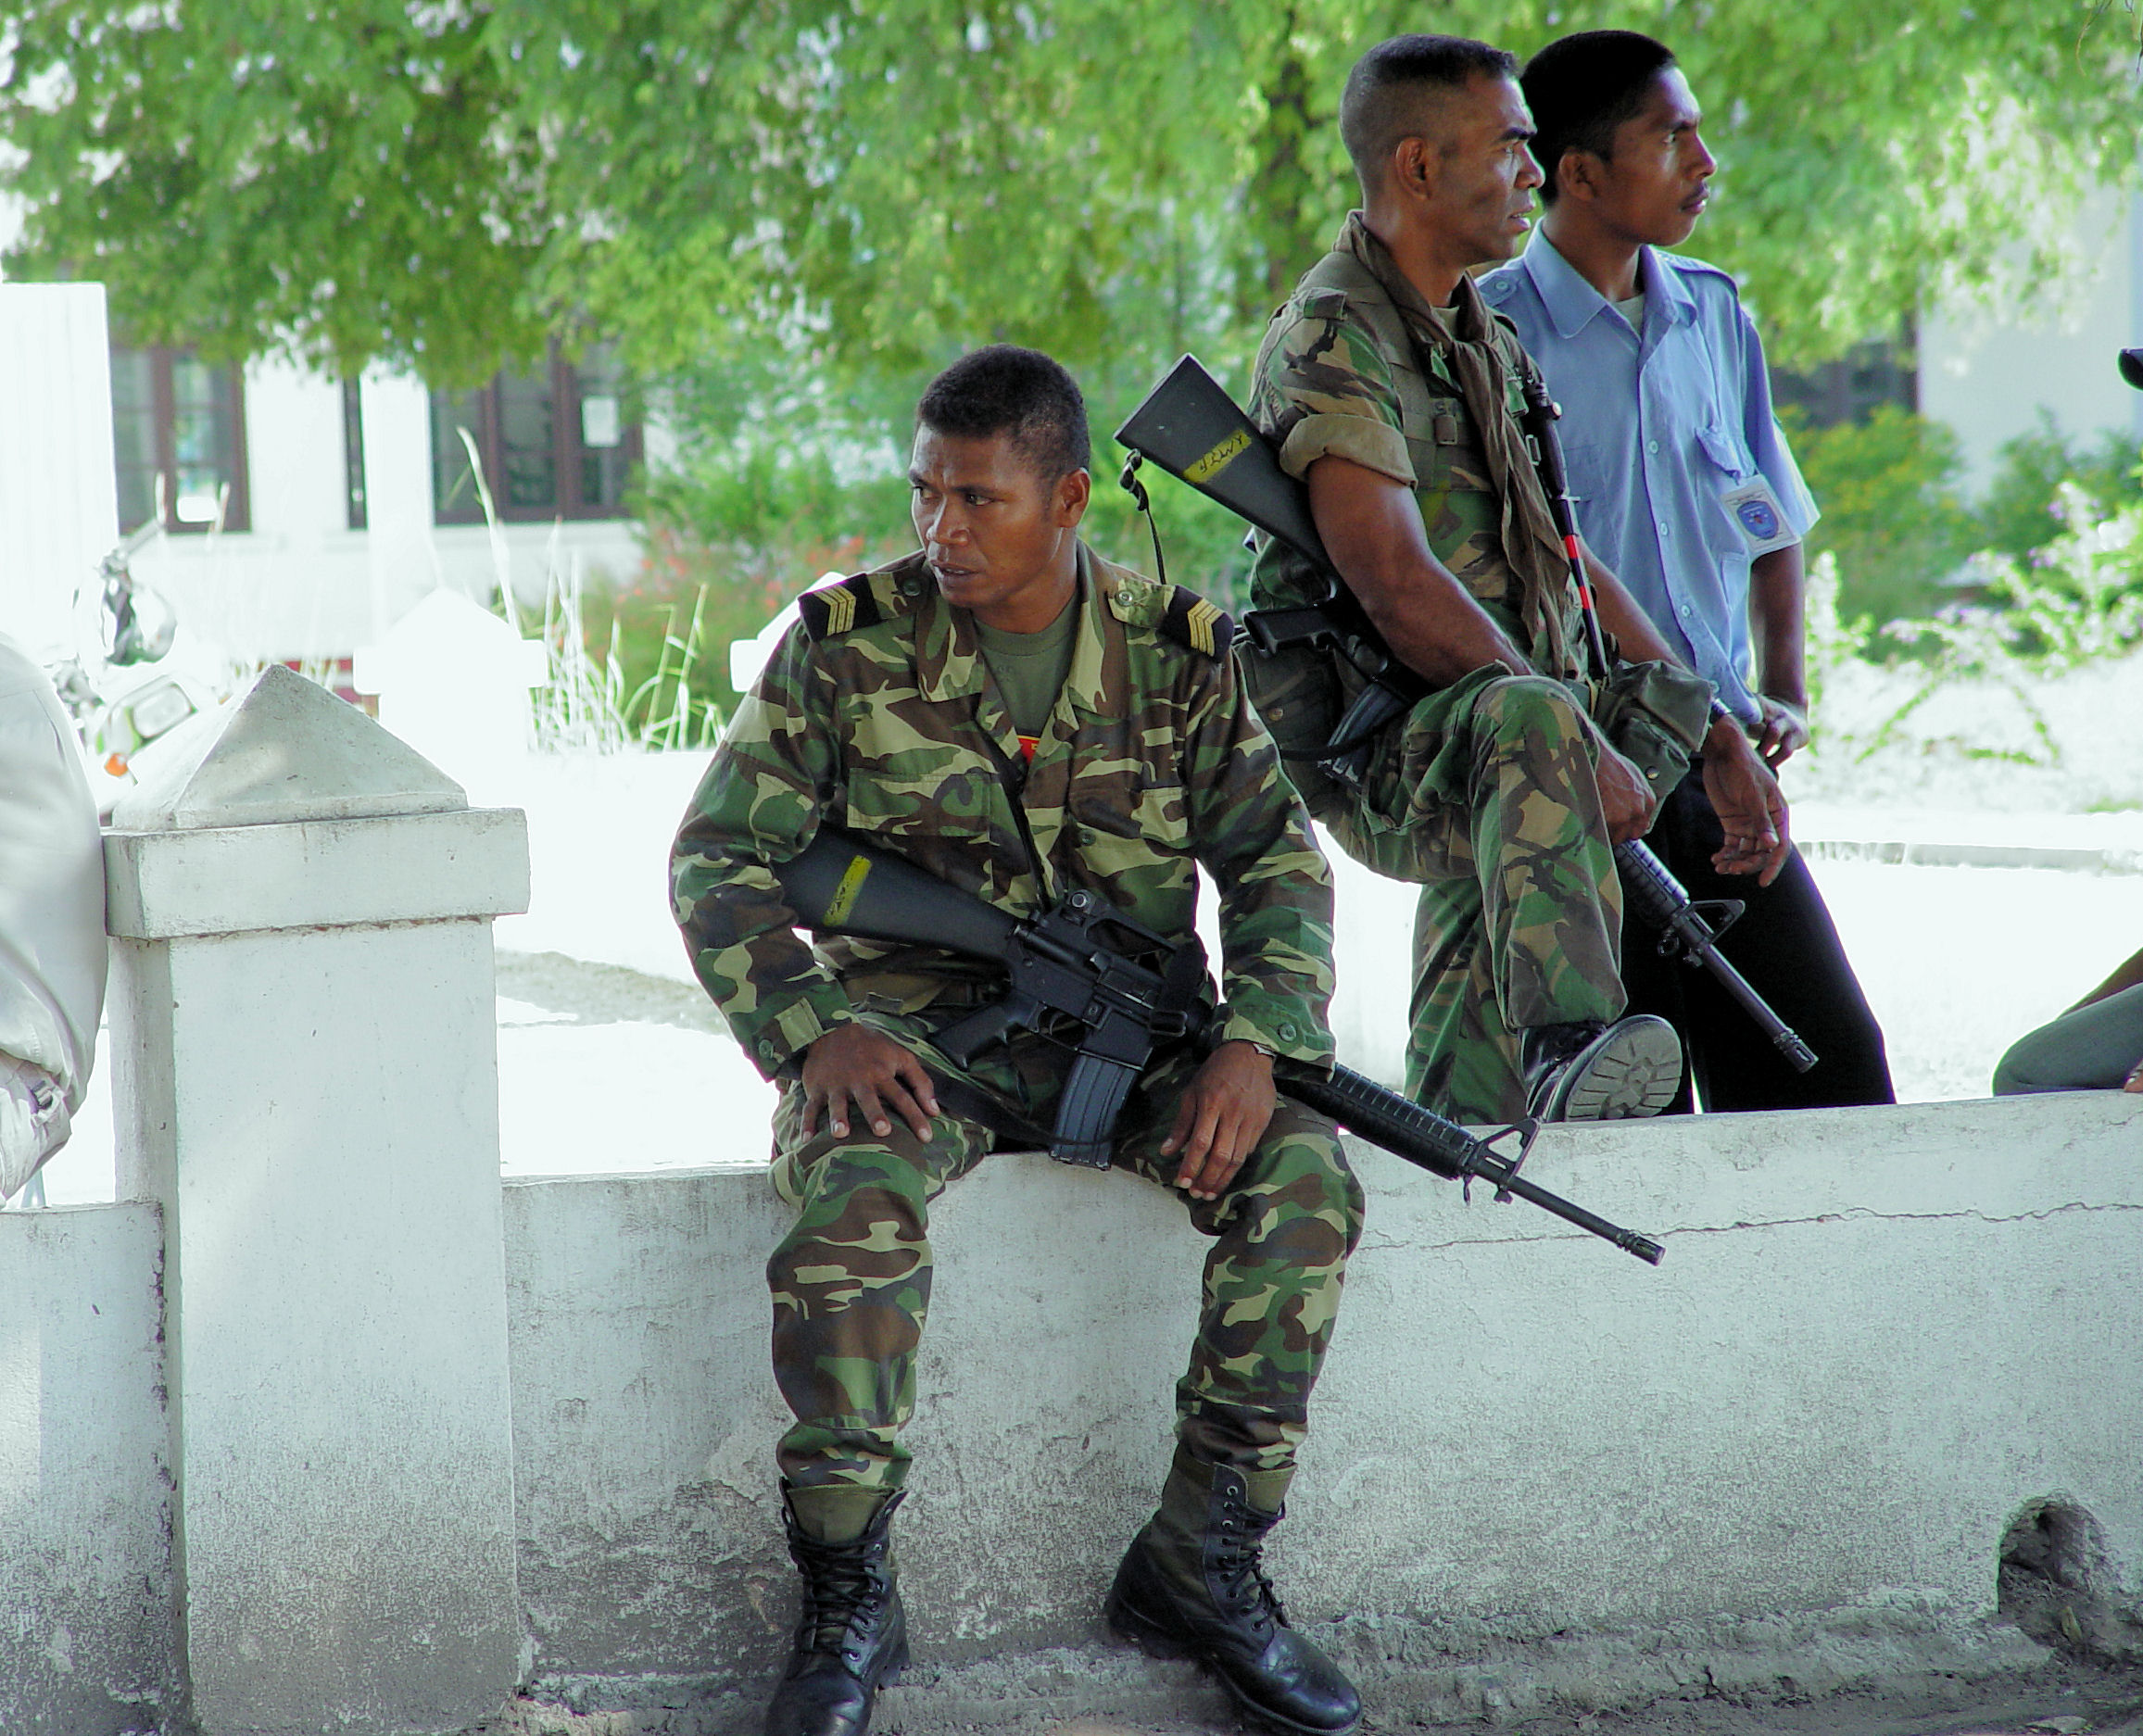 CLICK HERE - Soldiers guard unknown house